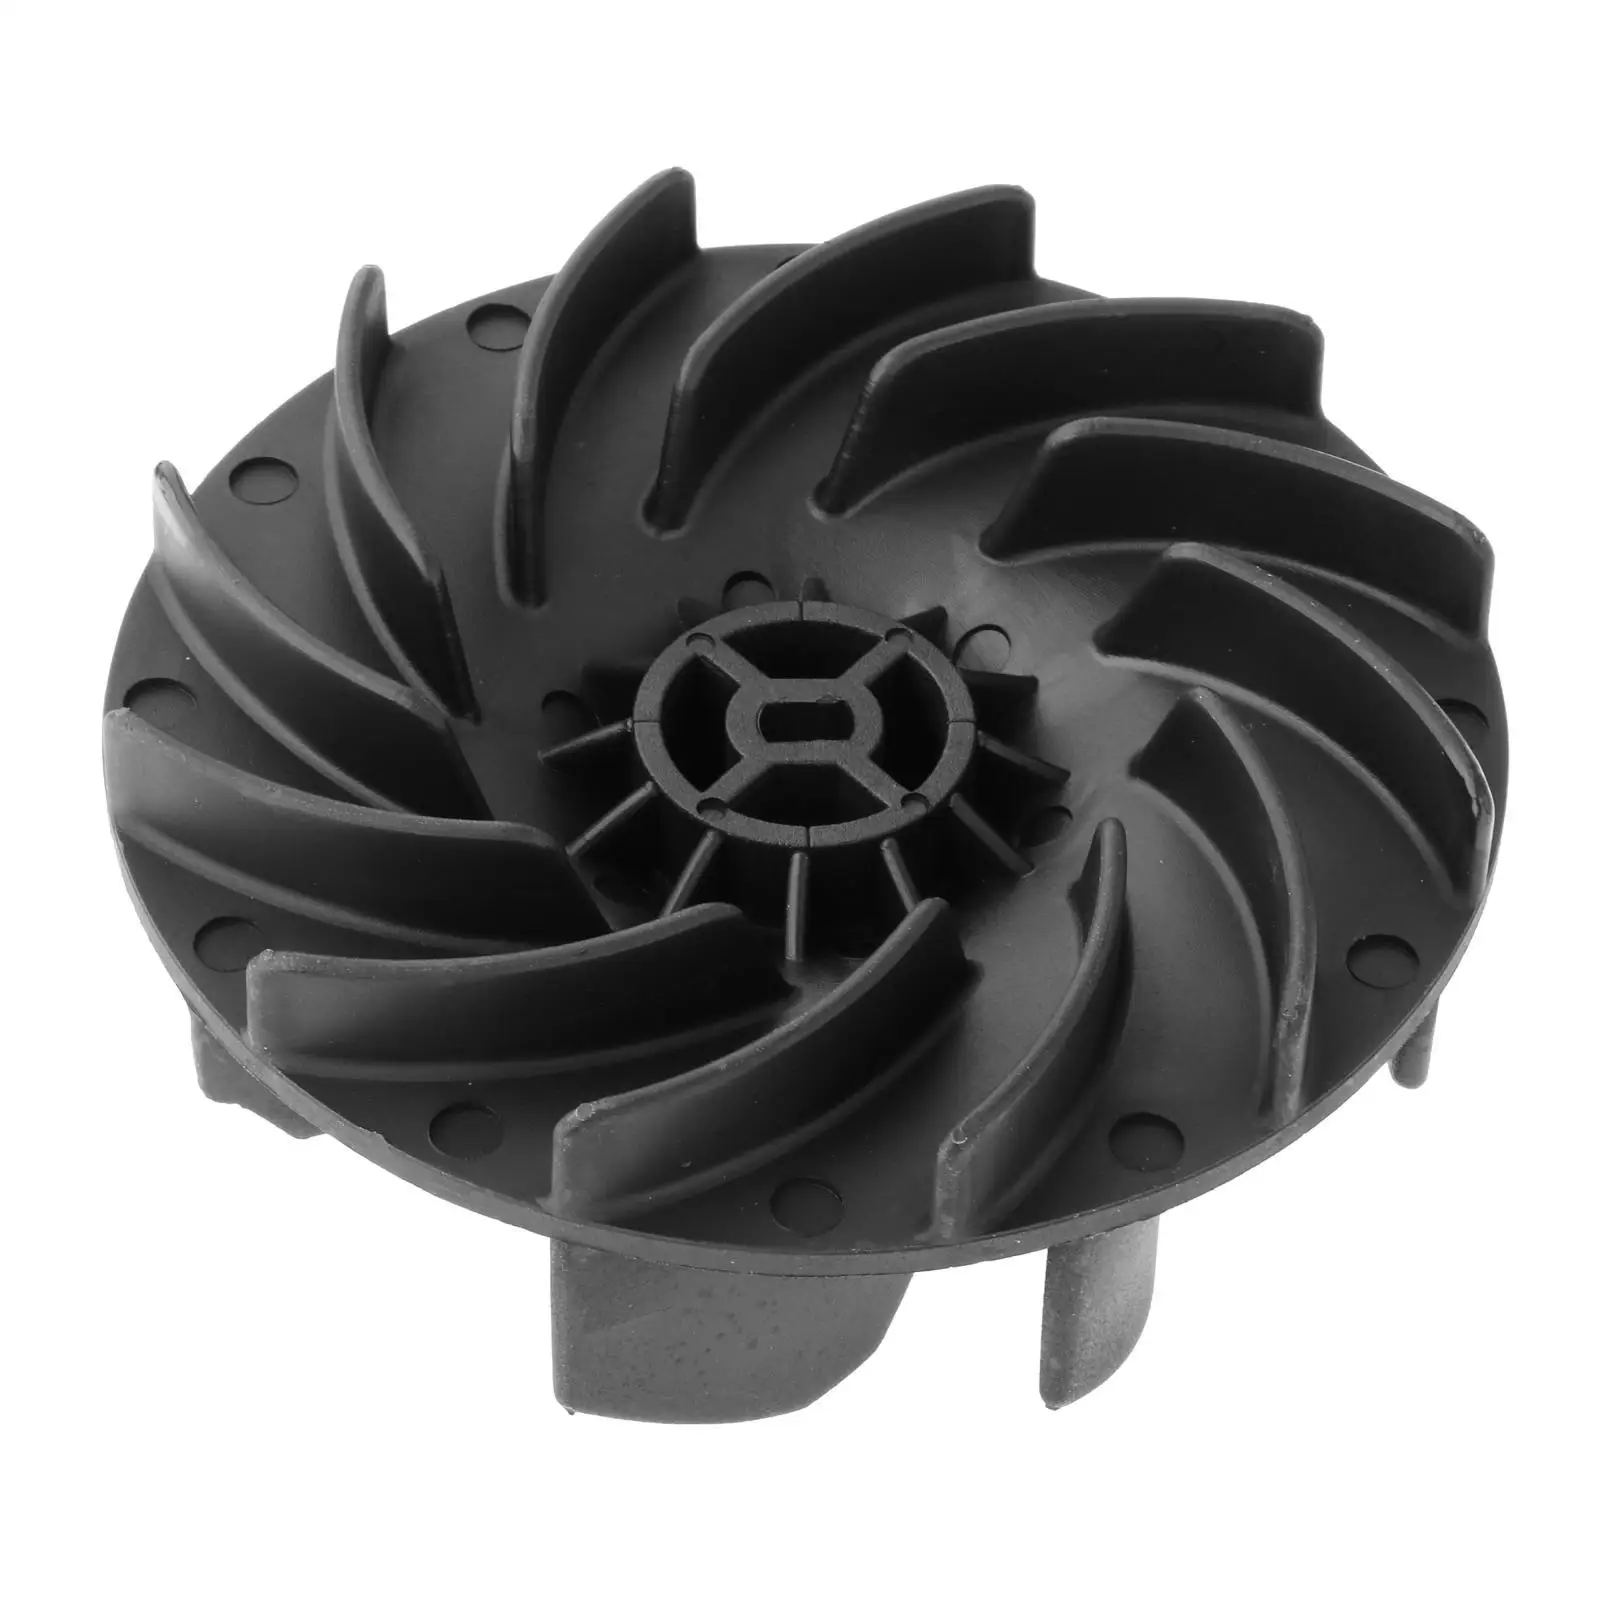  Leaf Blower Accs Replace for Electric Blower VAC Impeller Fan